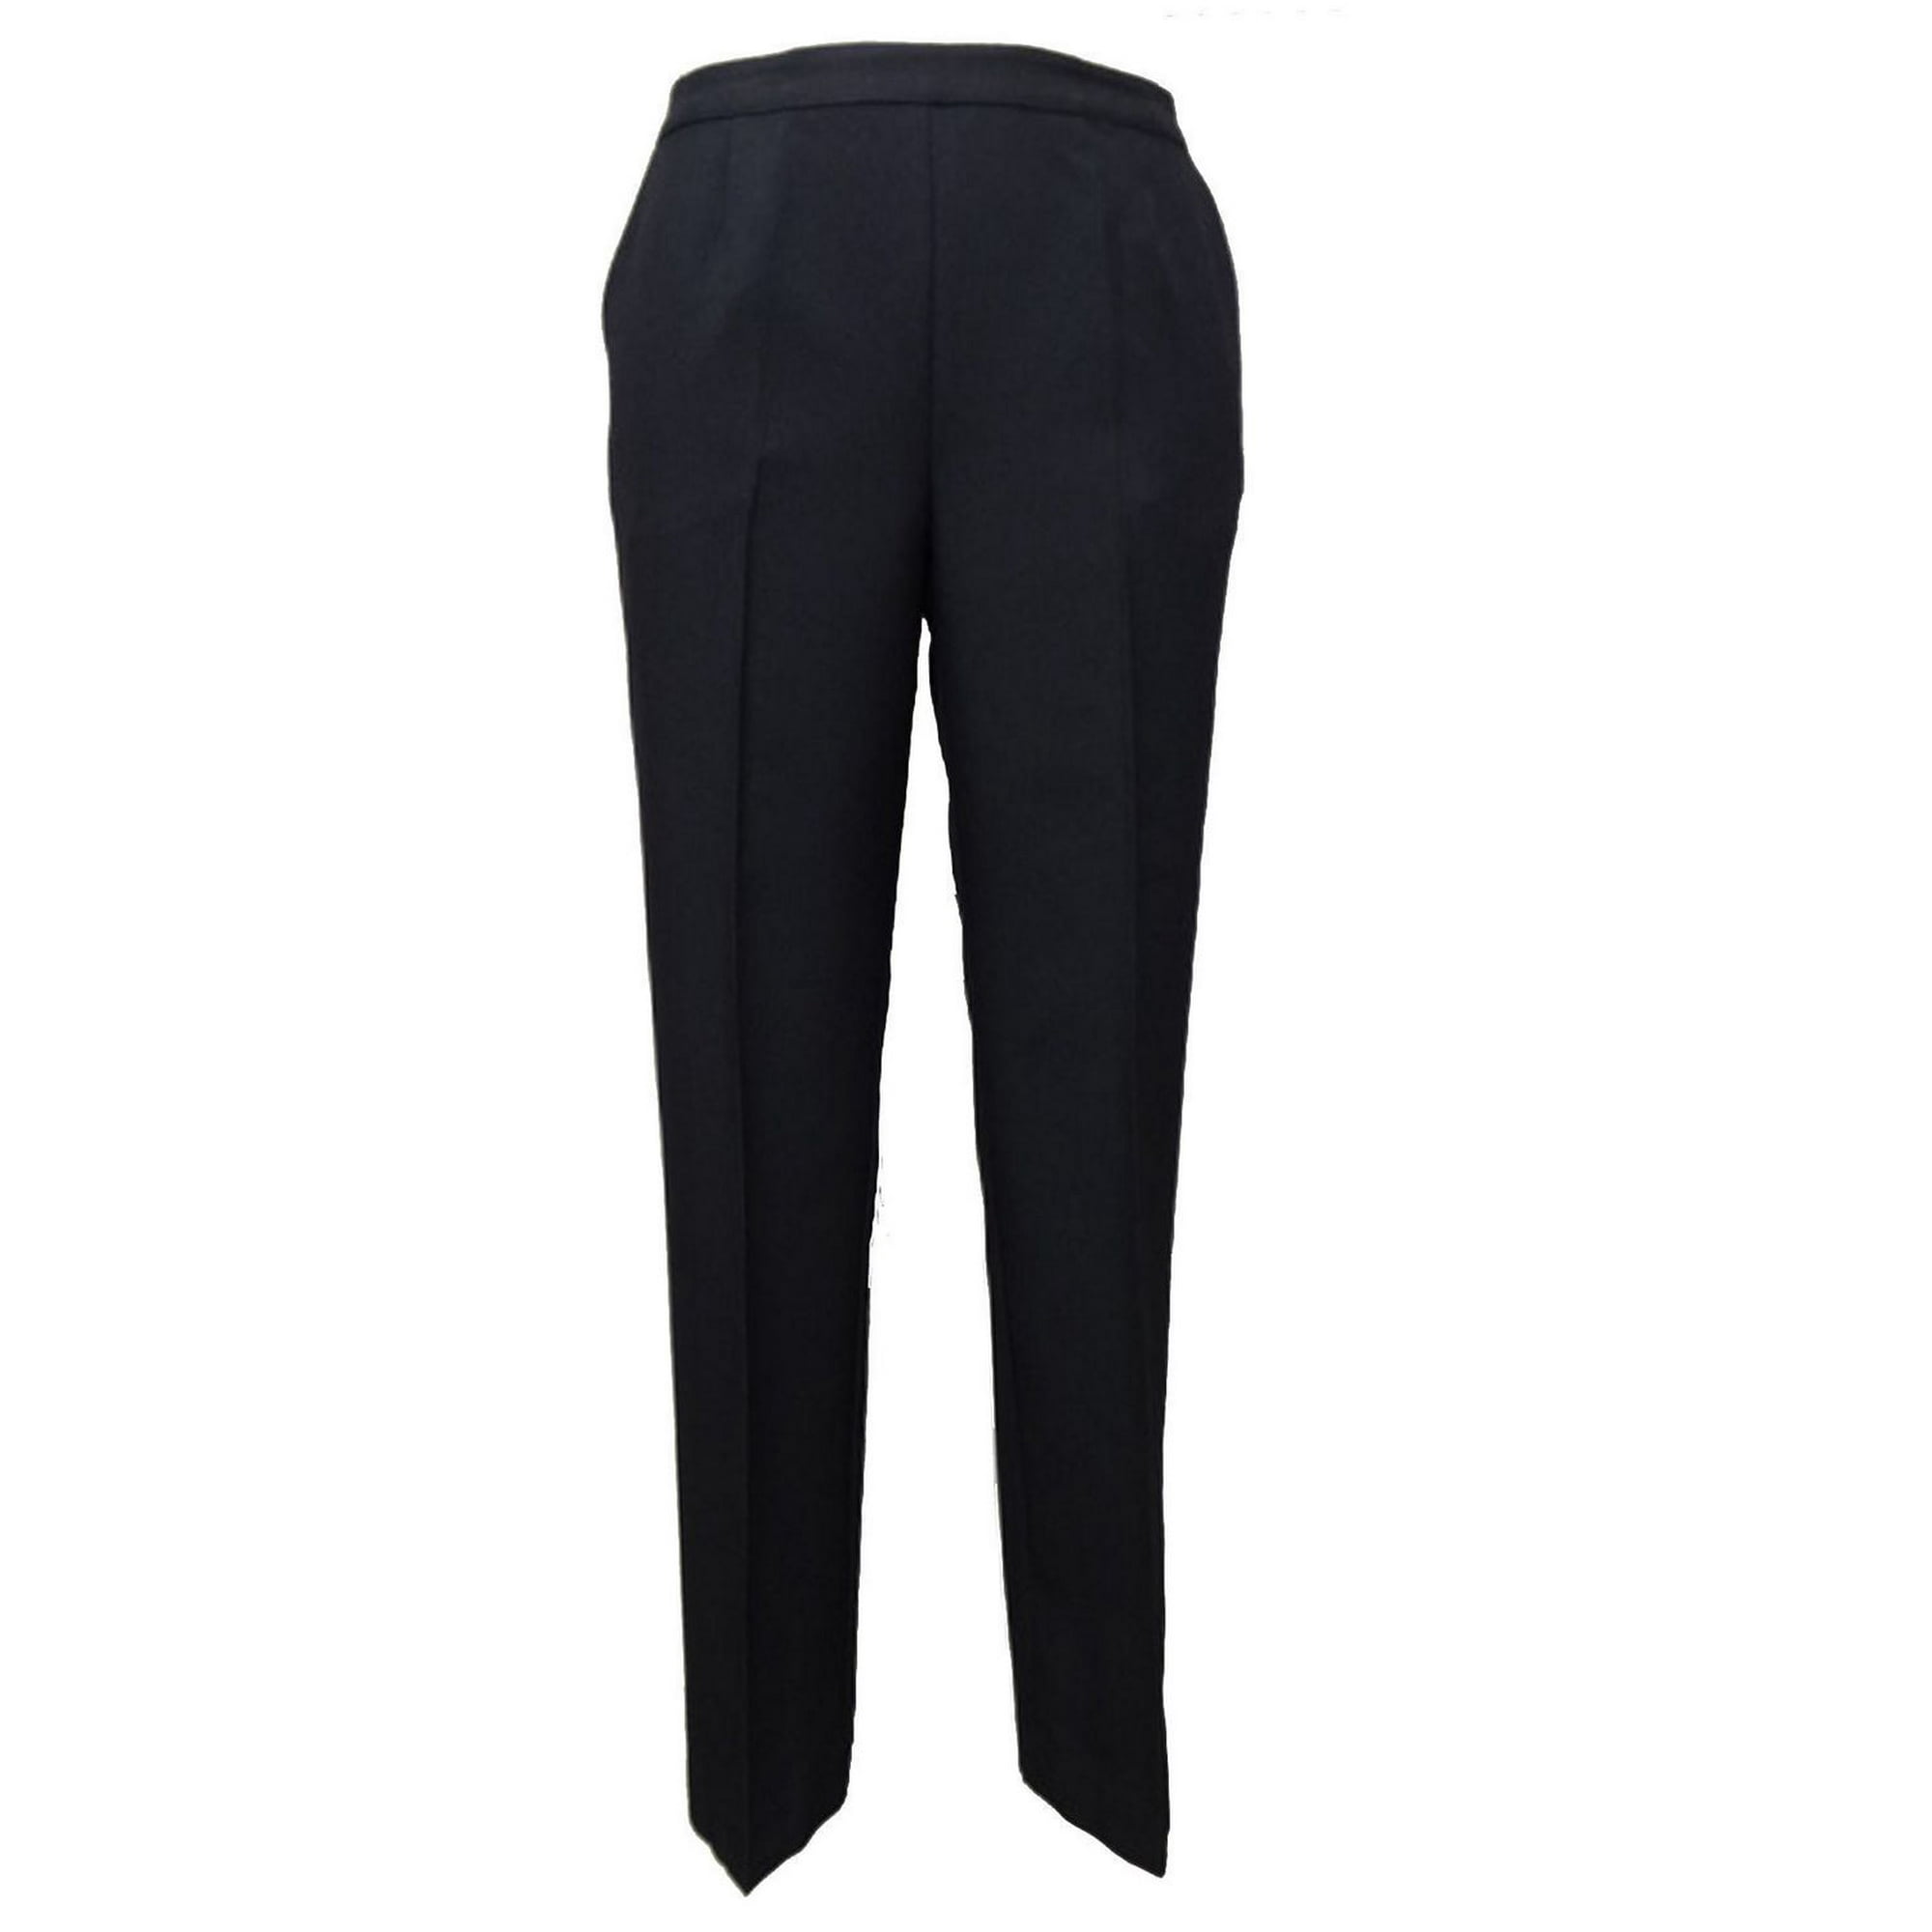 George Classic Women's Polyester Pull on Dress Pant 